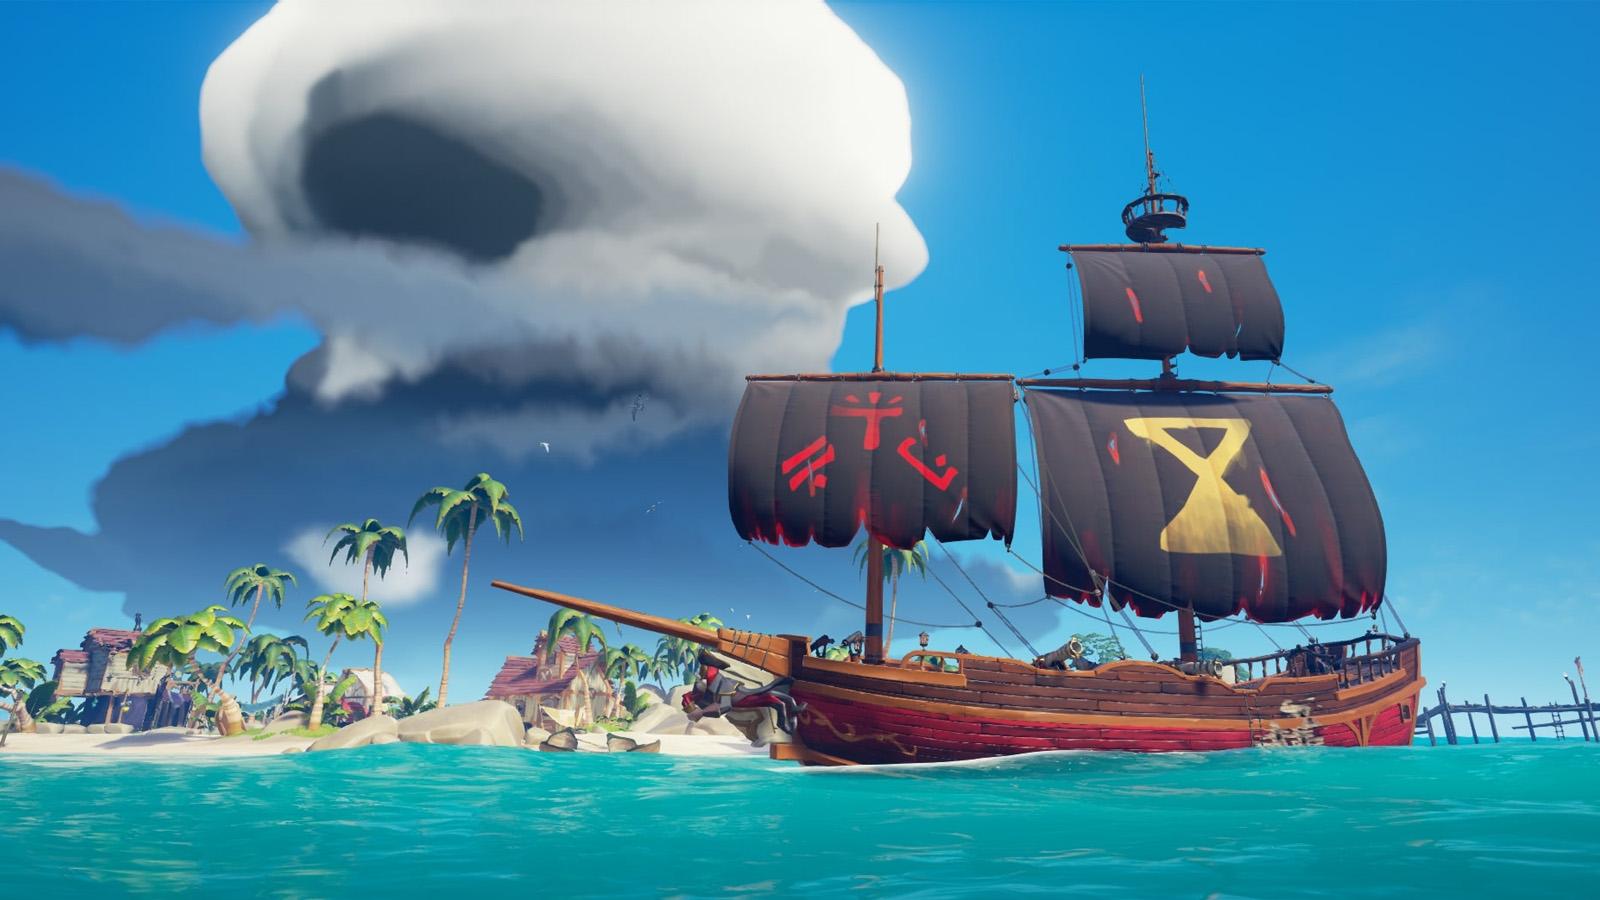 Sea of Thieves gameplay